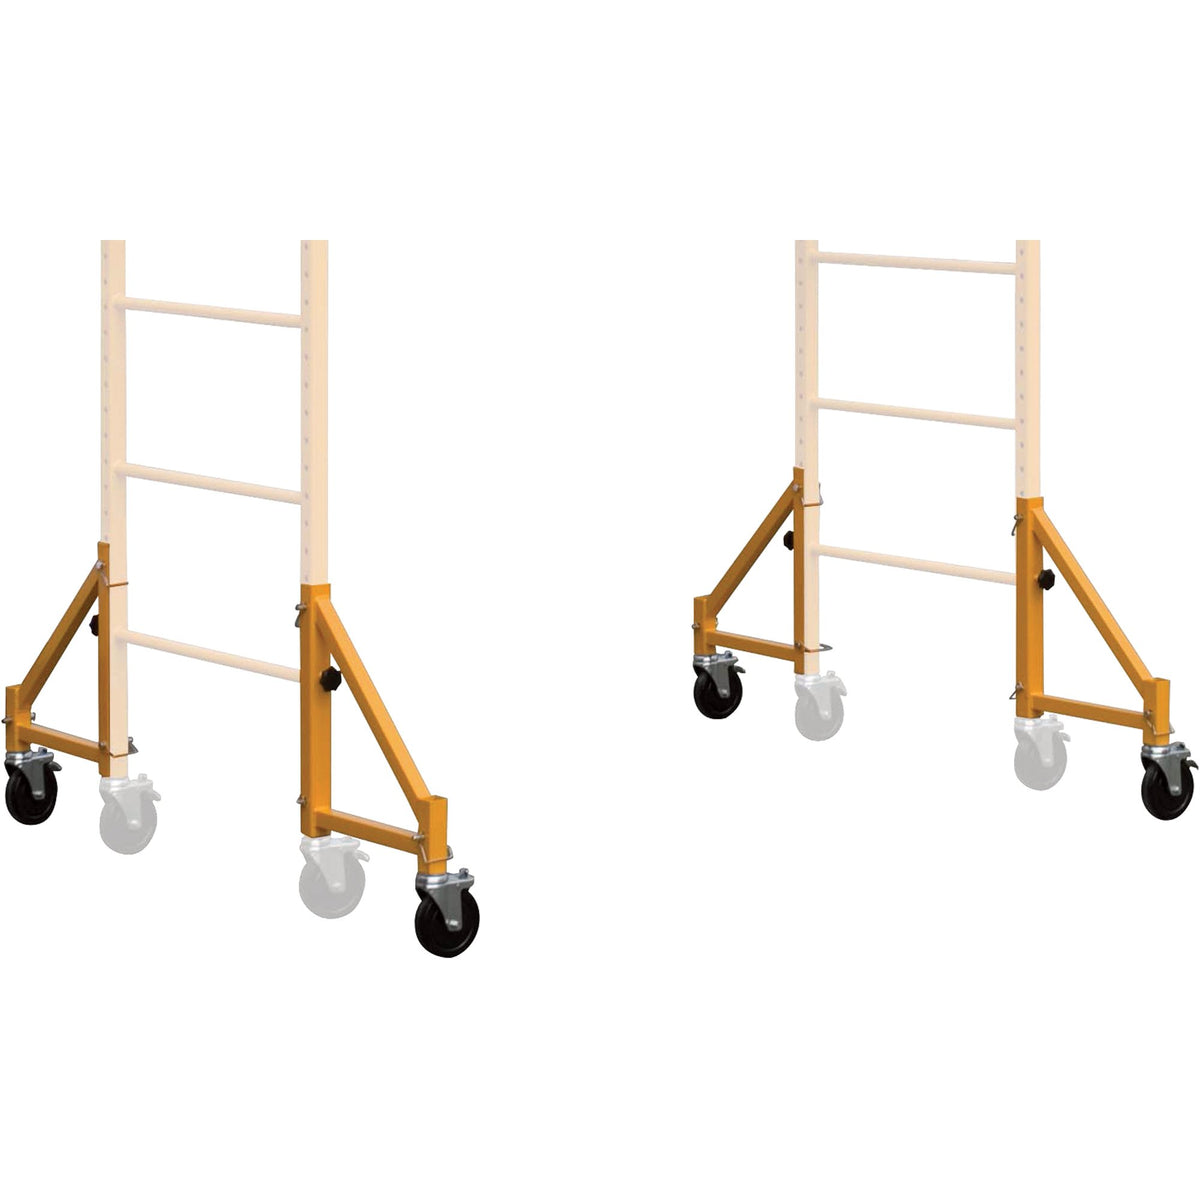 6 Foot Multi Purpose Rolling Scaffolding with Hatch, 1000-LB Capacity